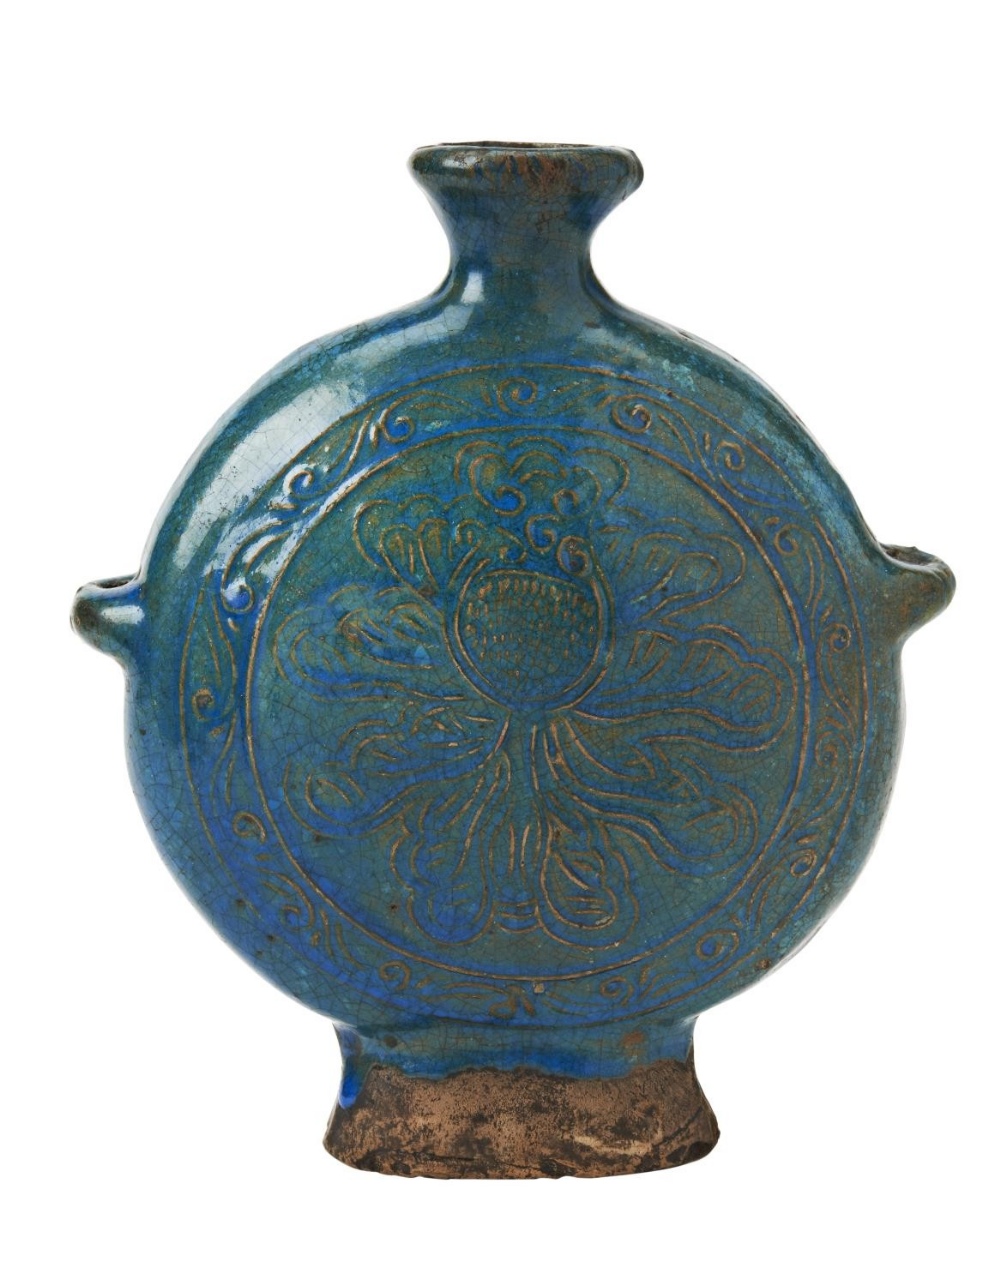 TURQUOISE-GLAZE 'LOTUS' MOONFLASK  MING DYNASTY, 16TH CENTURY the flatted ovoid sides covered in a r